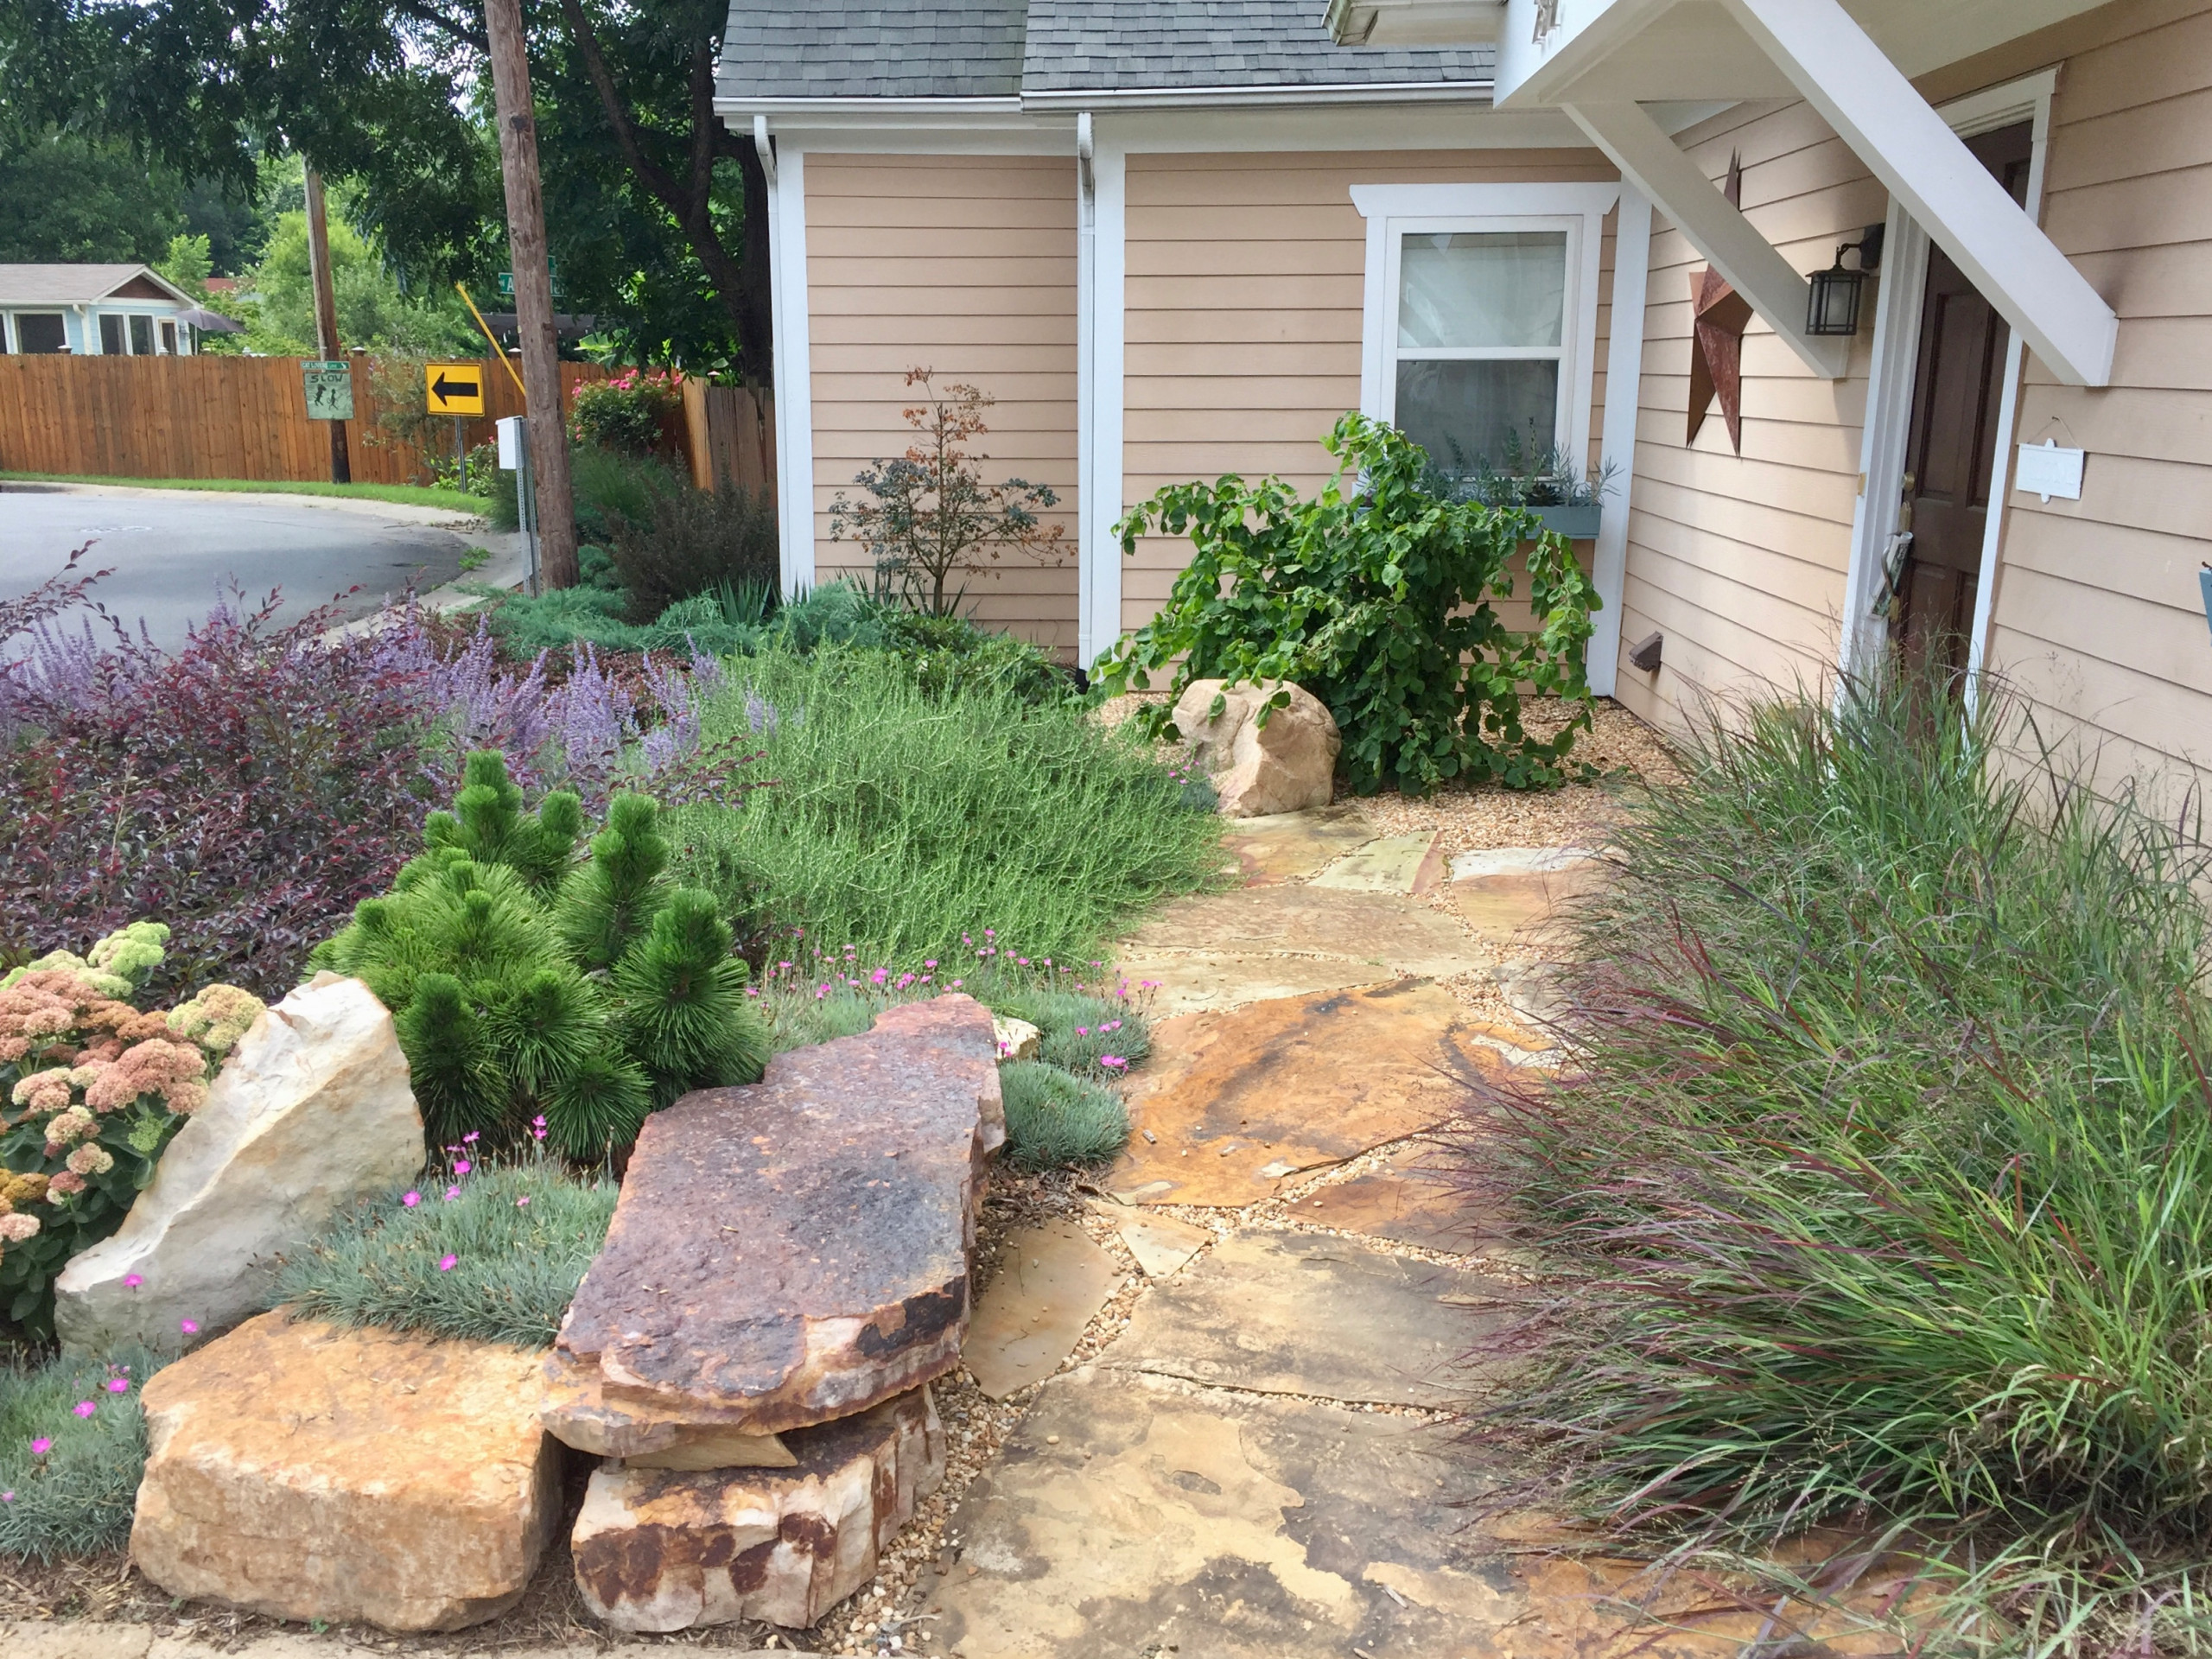 New front sidewalk, softened by textural plantings.